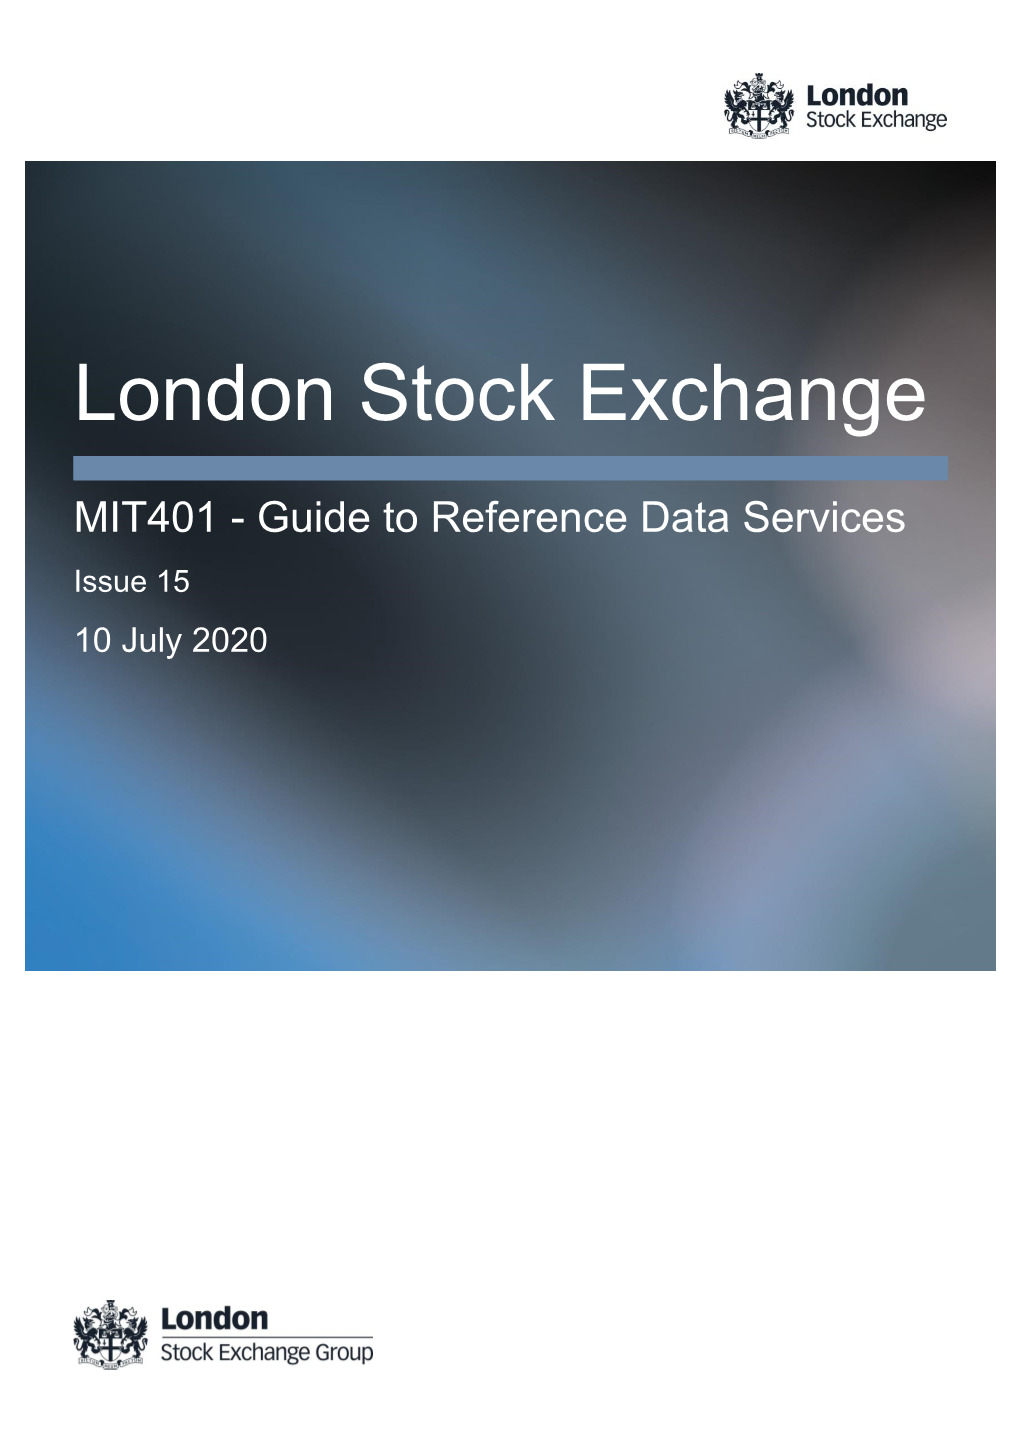 MIT401 - Guide to Reference Data Services Issue 15 10 July 2020